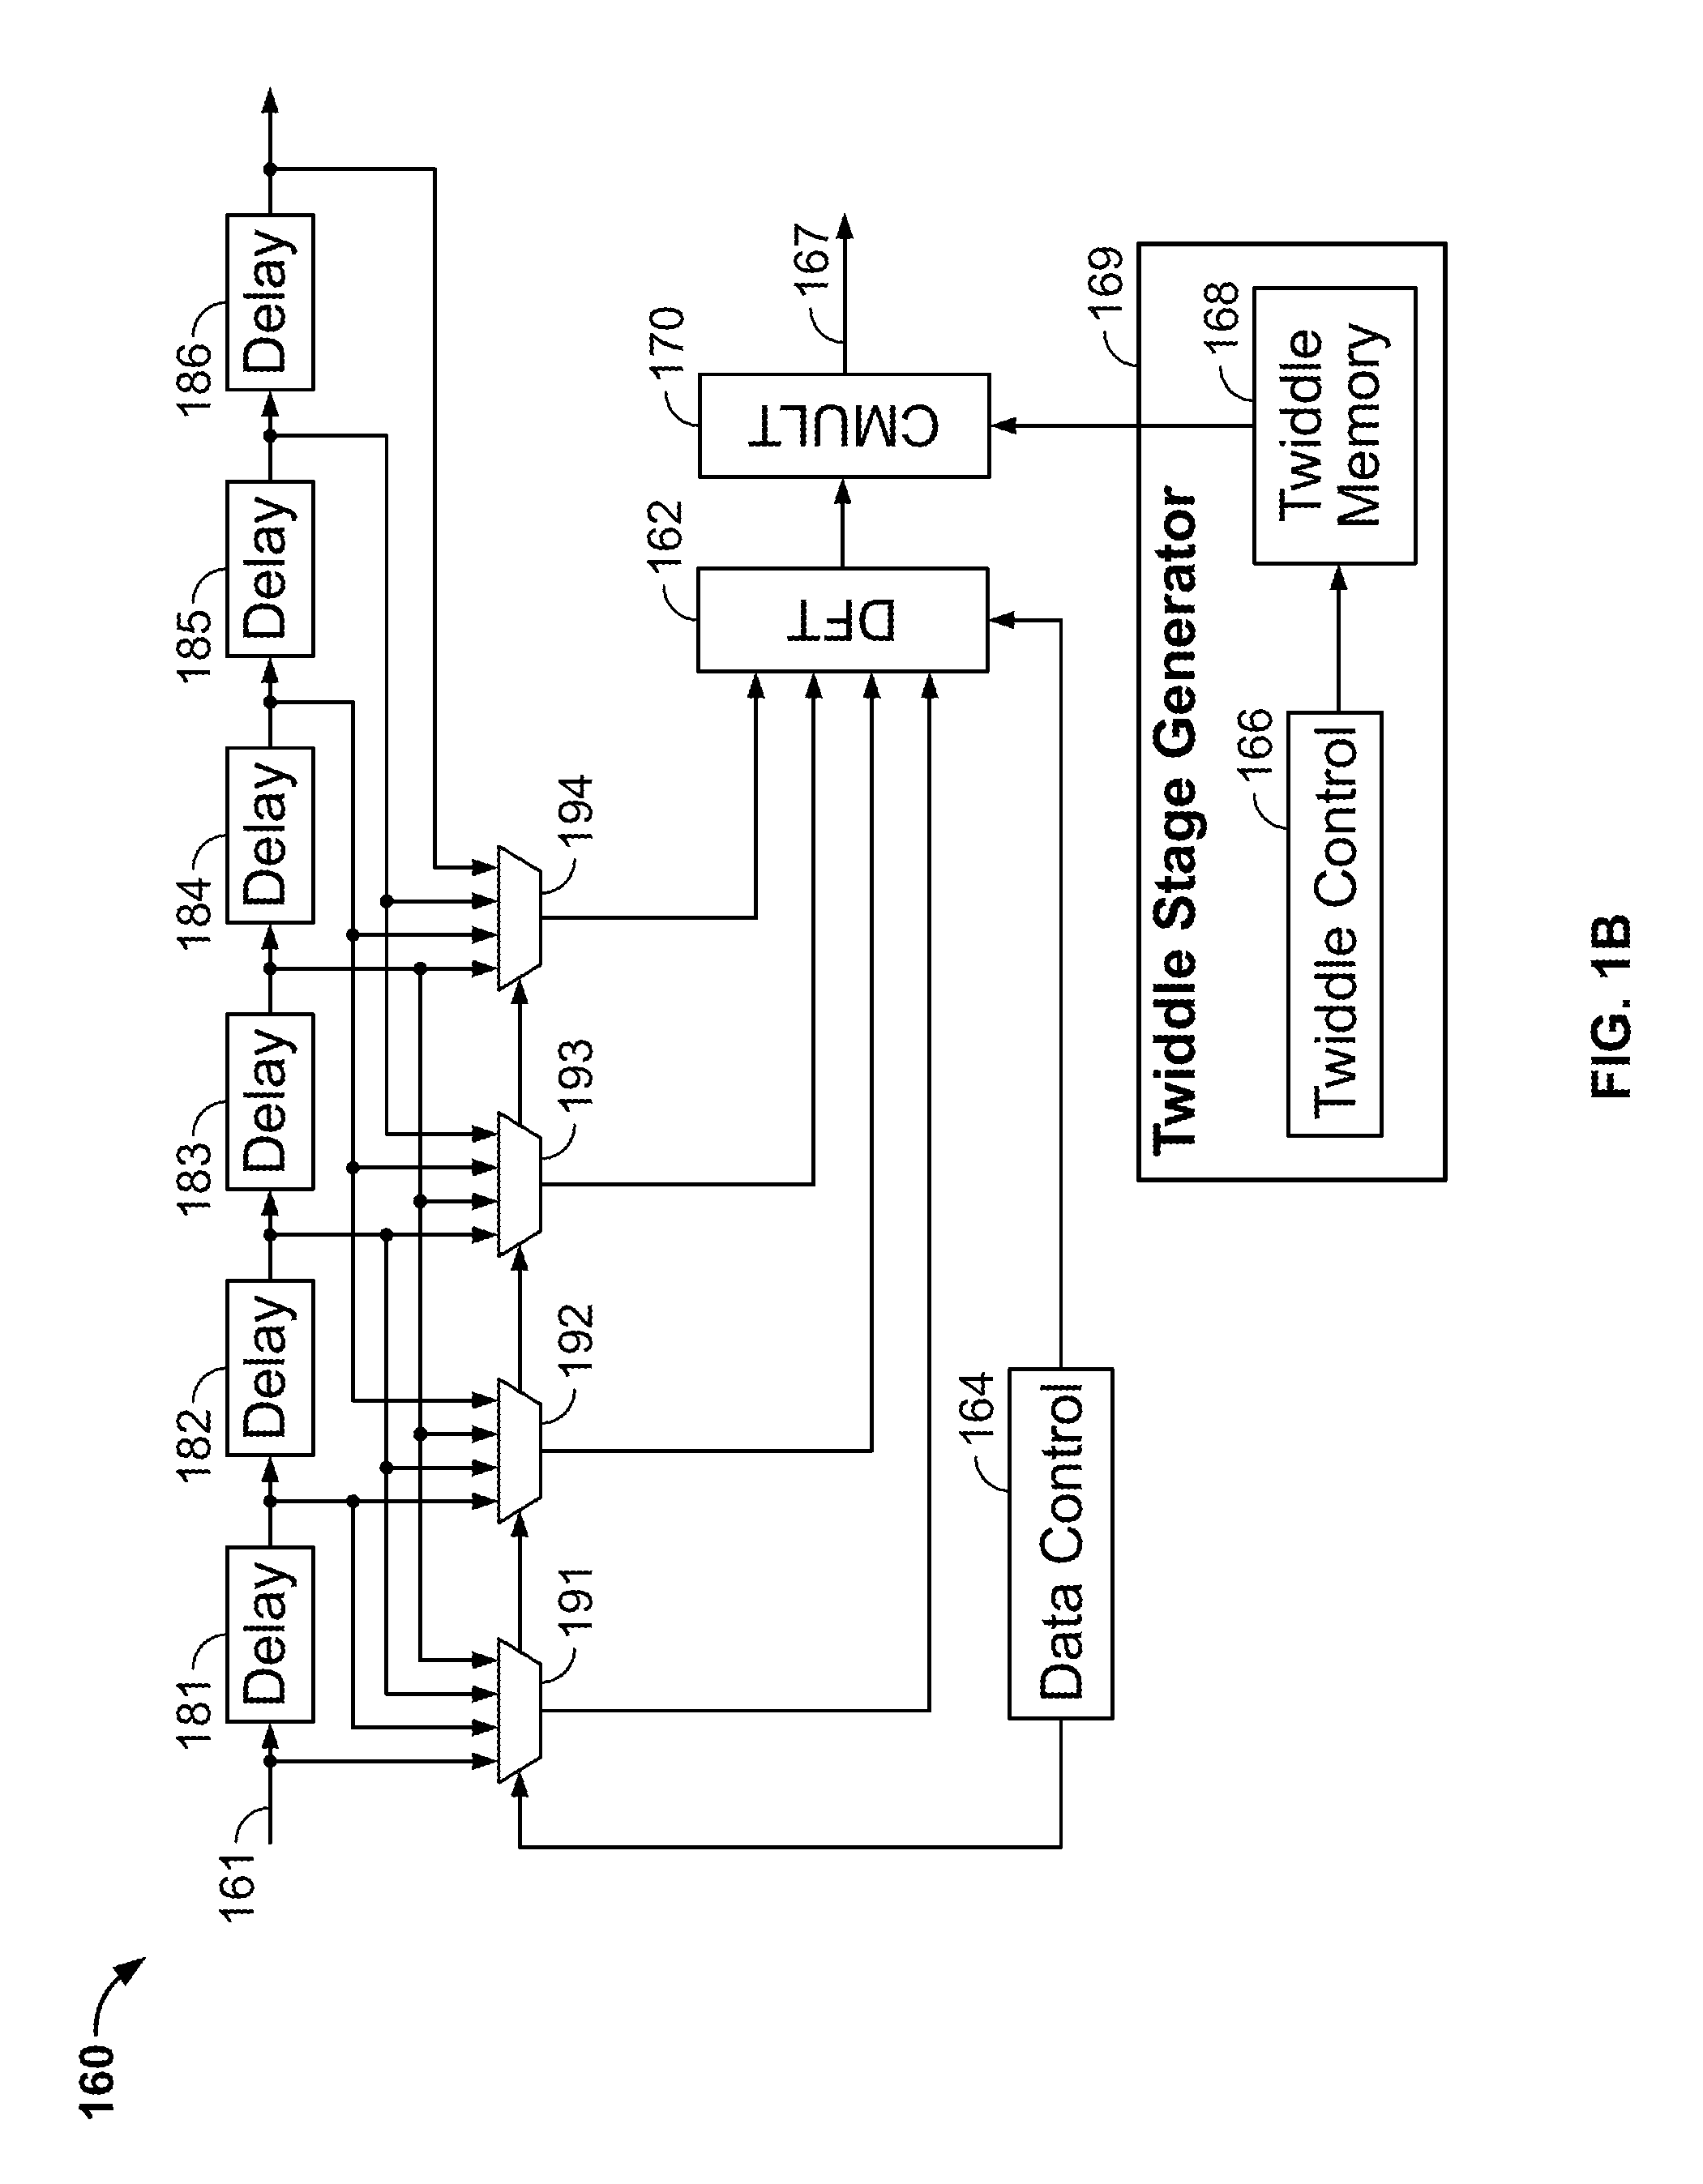 Bidirectional fast fourier transform in an integrated circuit device